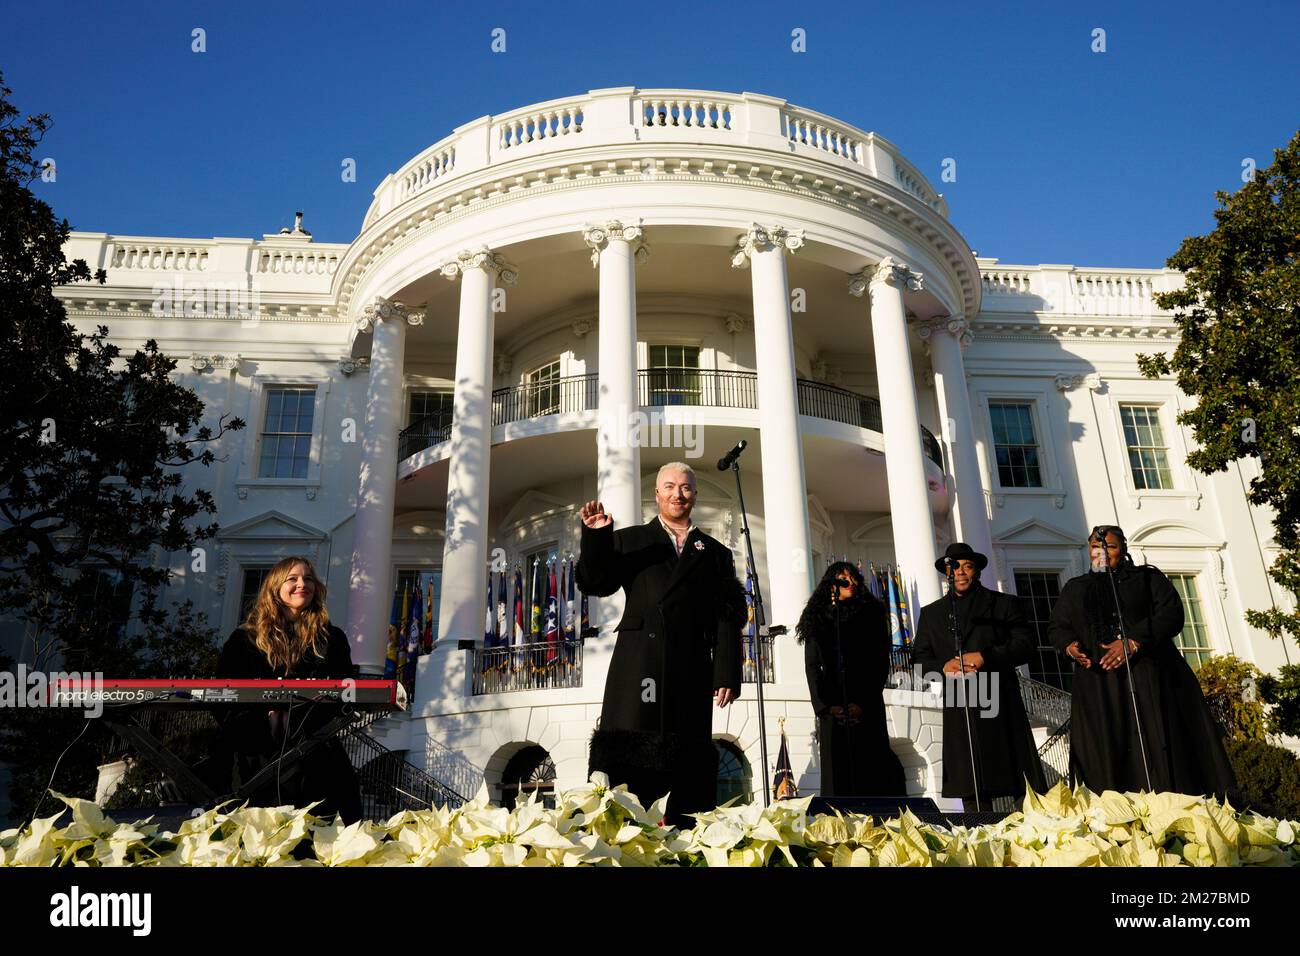 English singer Sam Smith performs during a ceremony with US President Joe Biden to sign the Respect for Marriage Act on the South Lawn of the White House in Washington, DC on December 13, 2022. Credit: Yuri Gripas/Pool via CNP Stock Photo